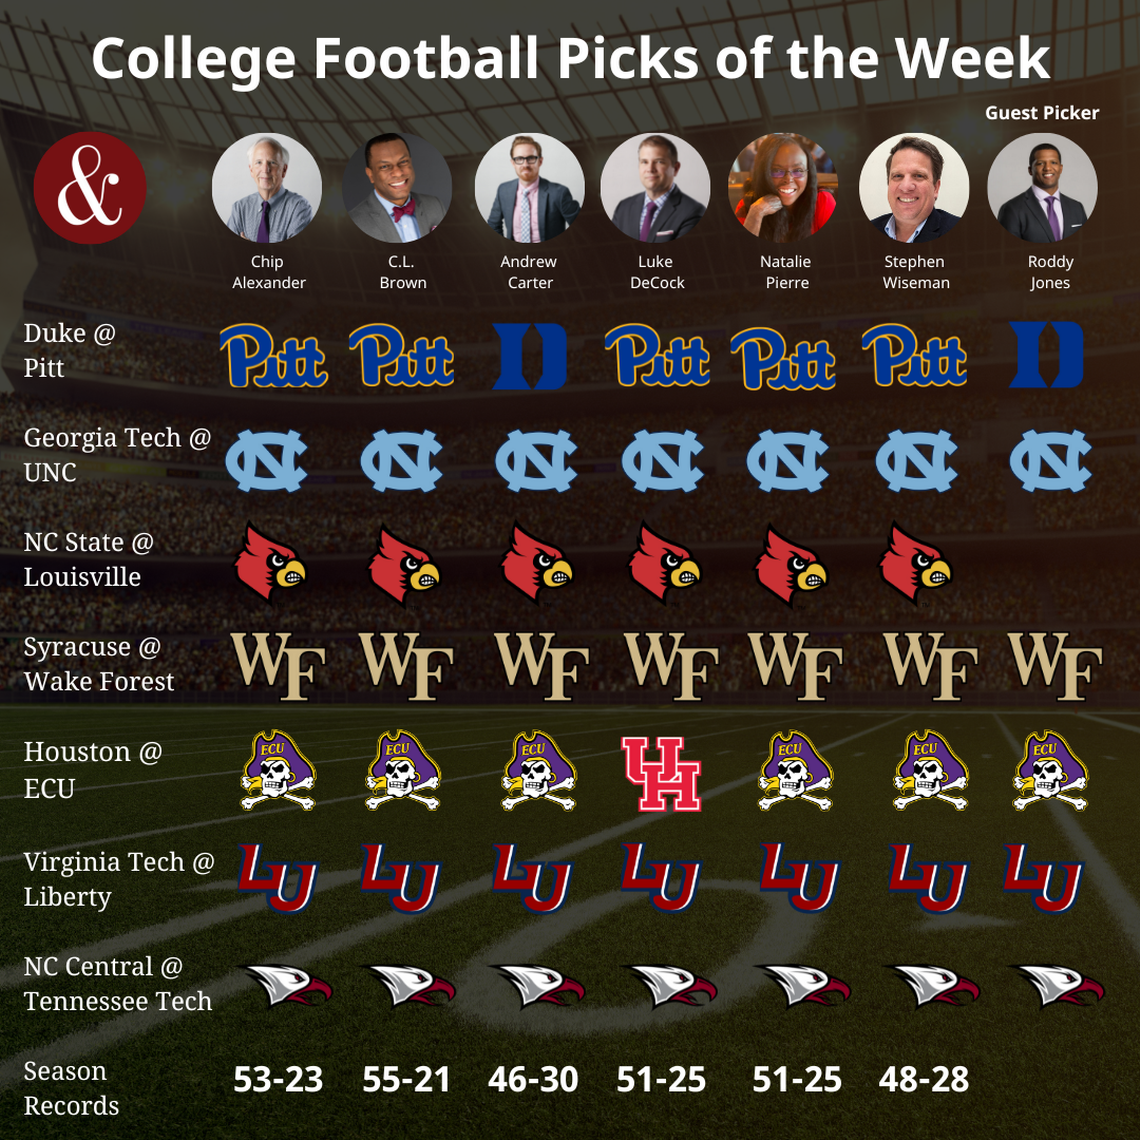 News & Observer sports staff picks games for Week 12 of the college football season. Roddy Jones, the ACC Network analyst and former Georgia Tech star, is this week’s guest picker.